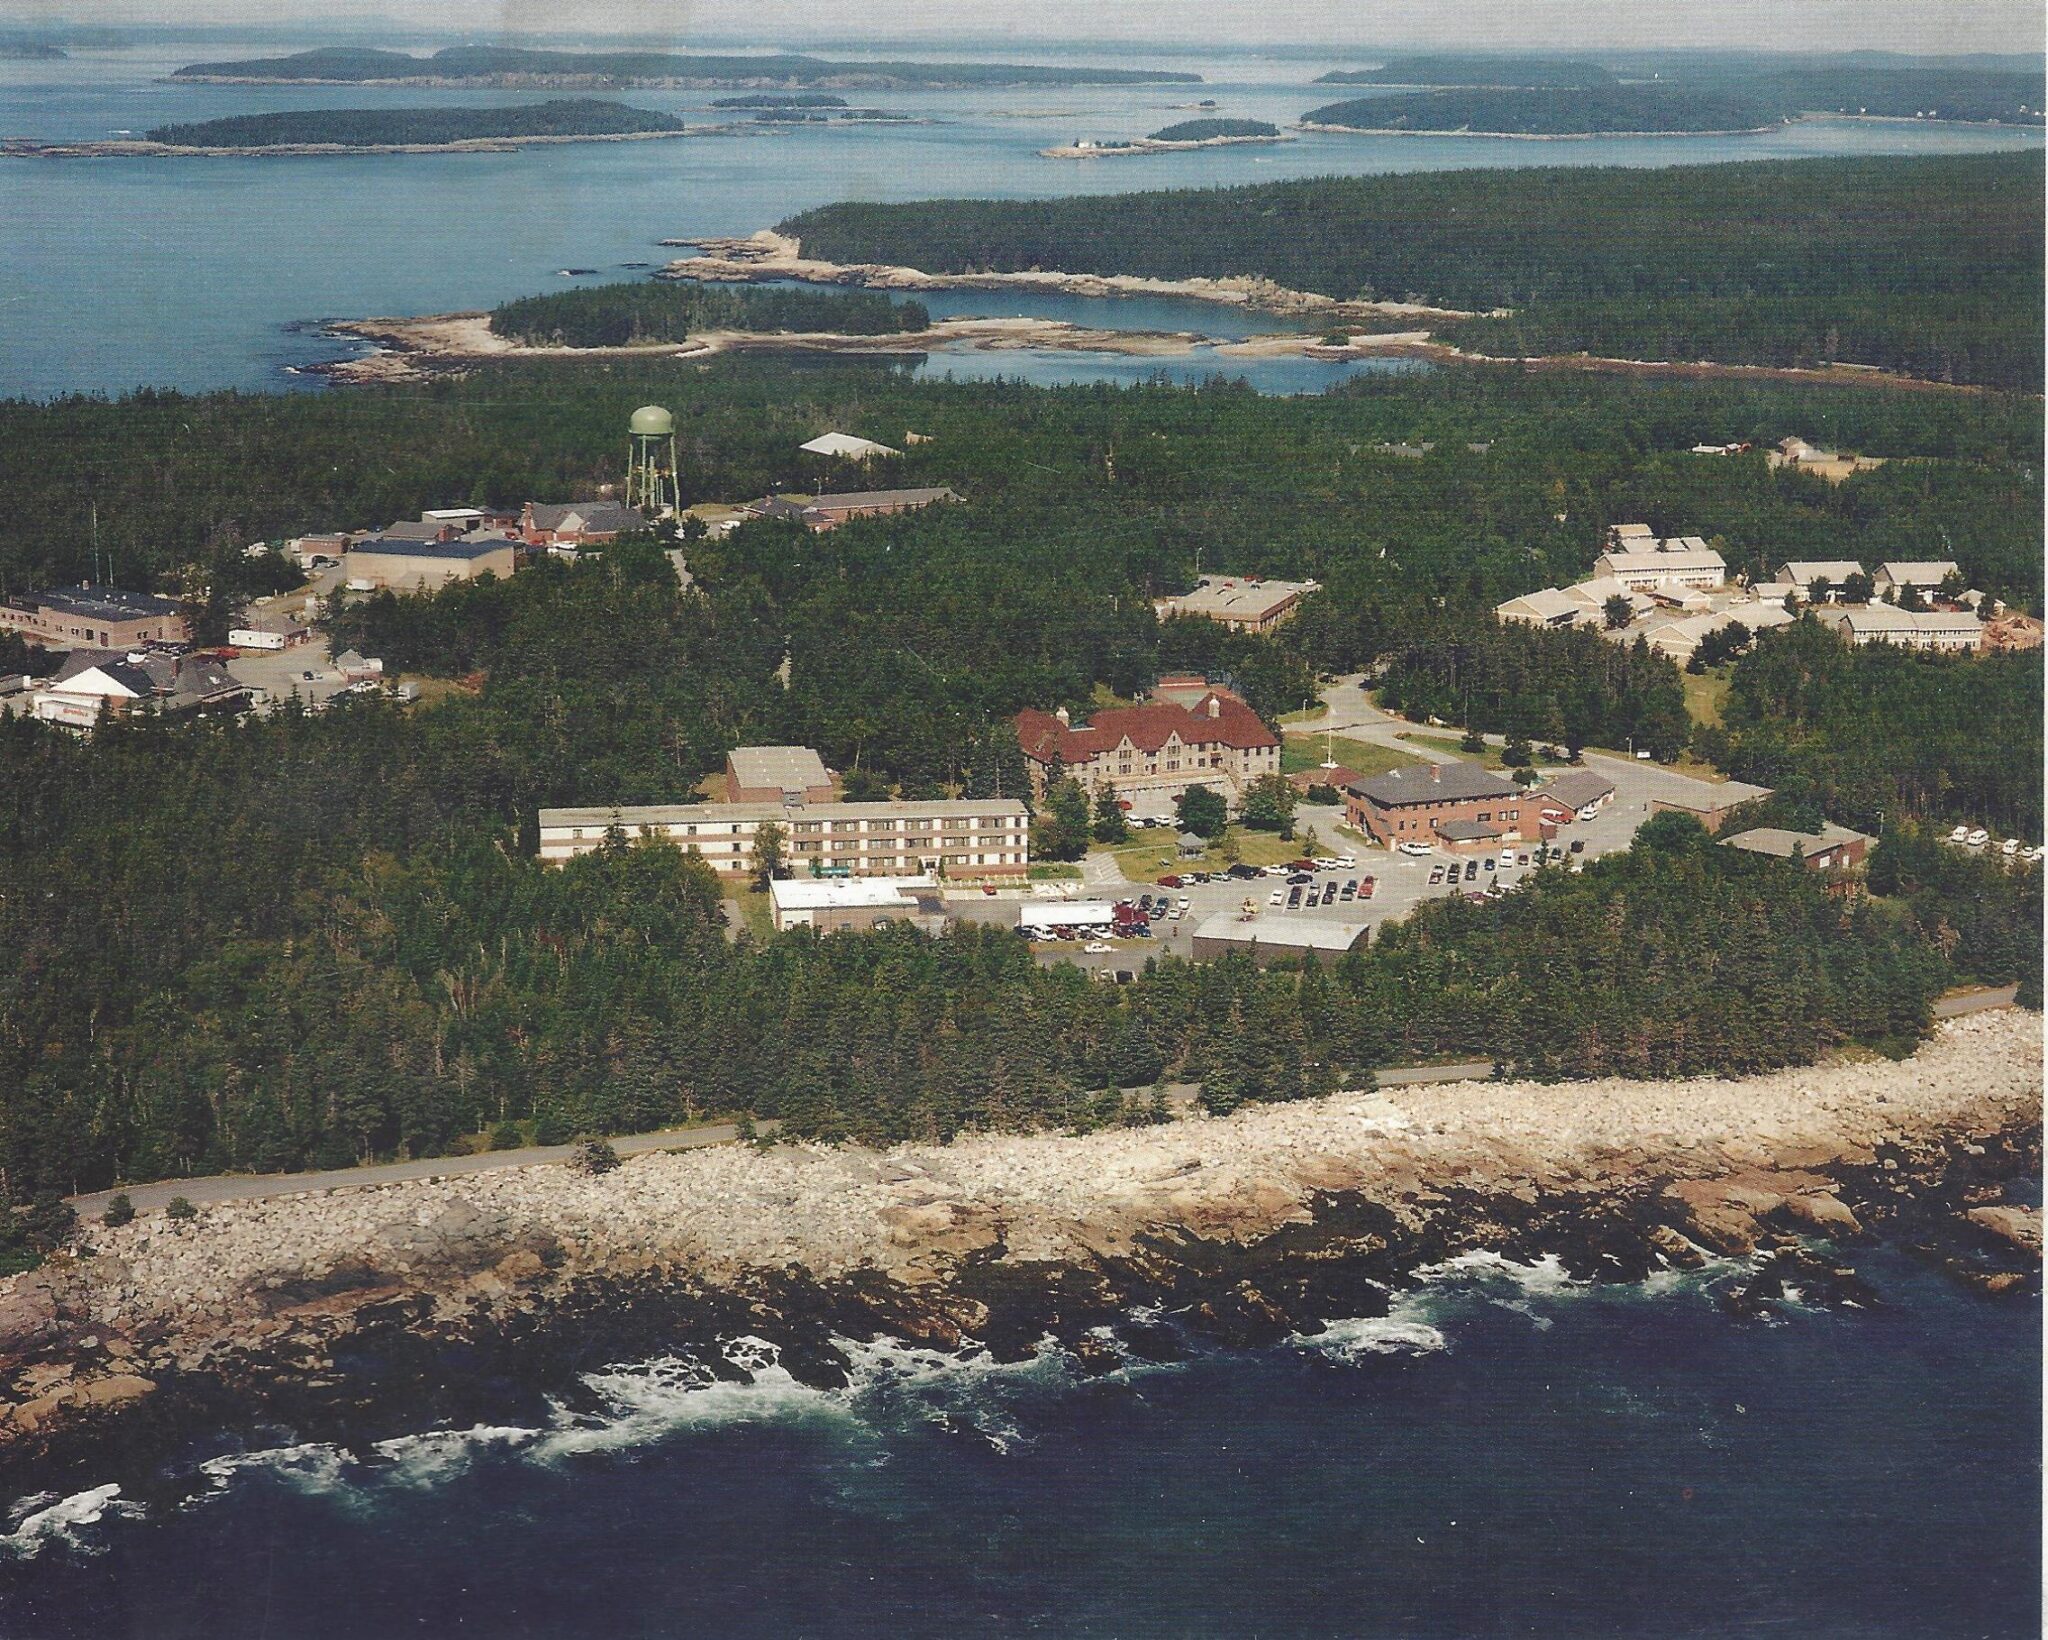 Overhead view of Schoodic Point and former Navy base